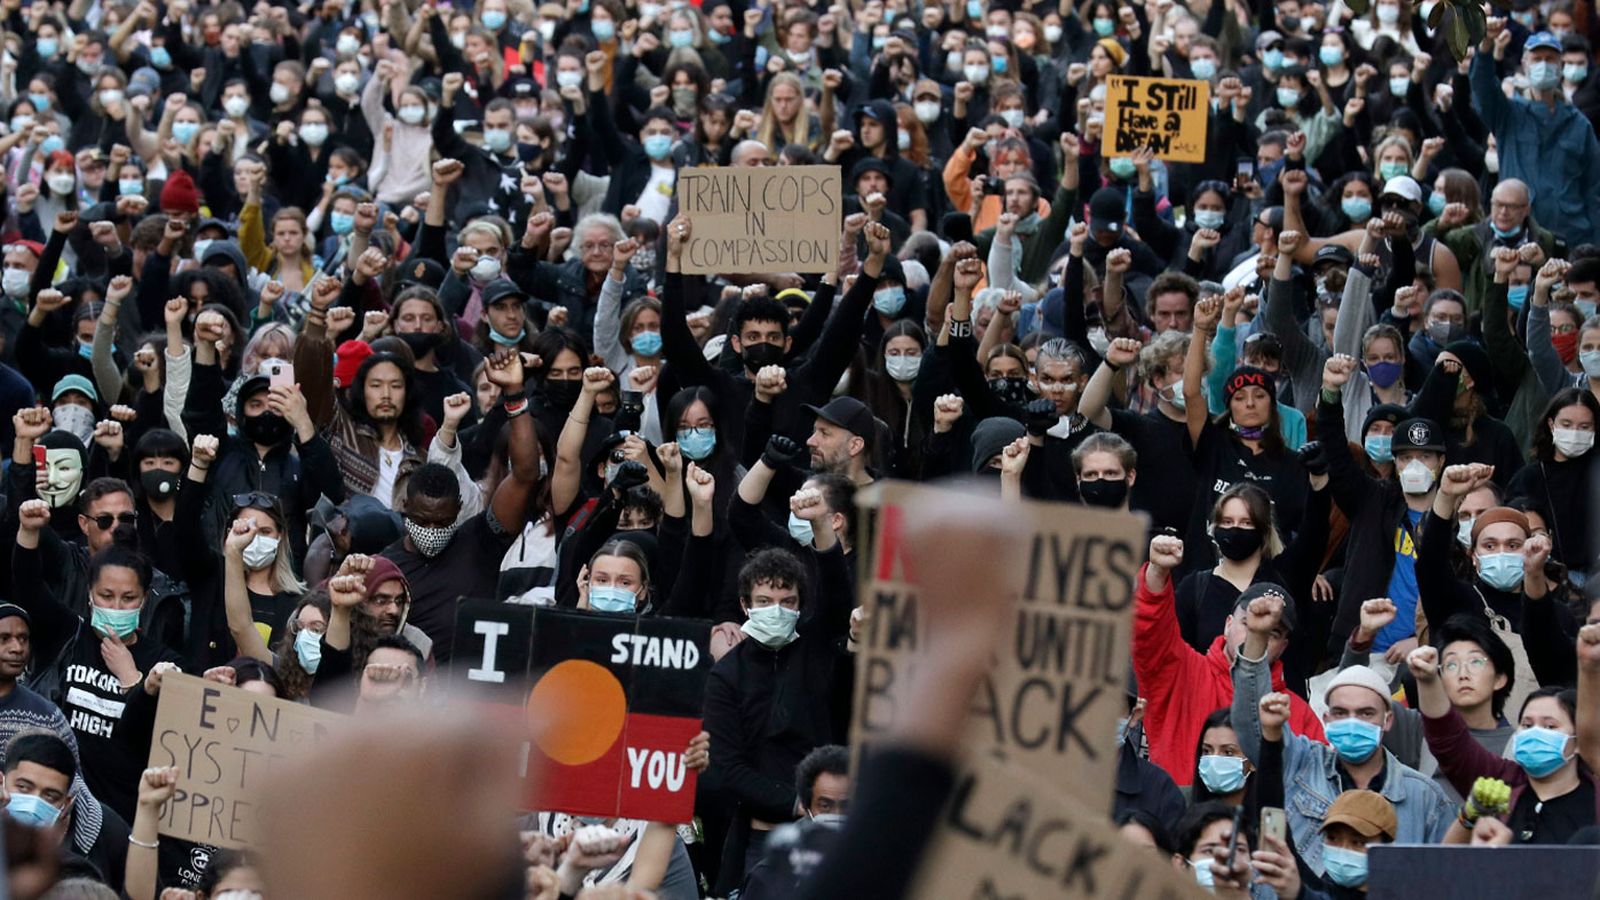 Thousands rallied in Sydney in support of the Black Lives Matter movement. (Rick Rycroft) (AP)